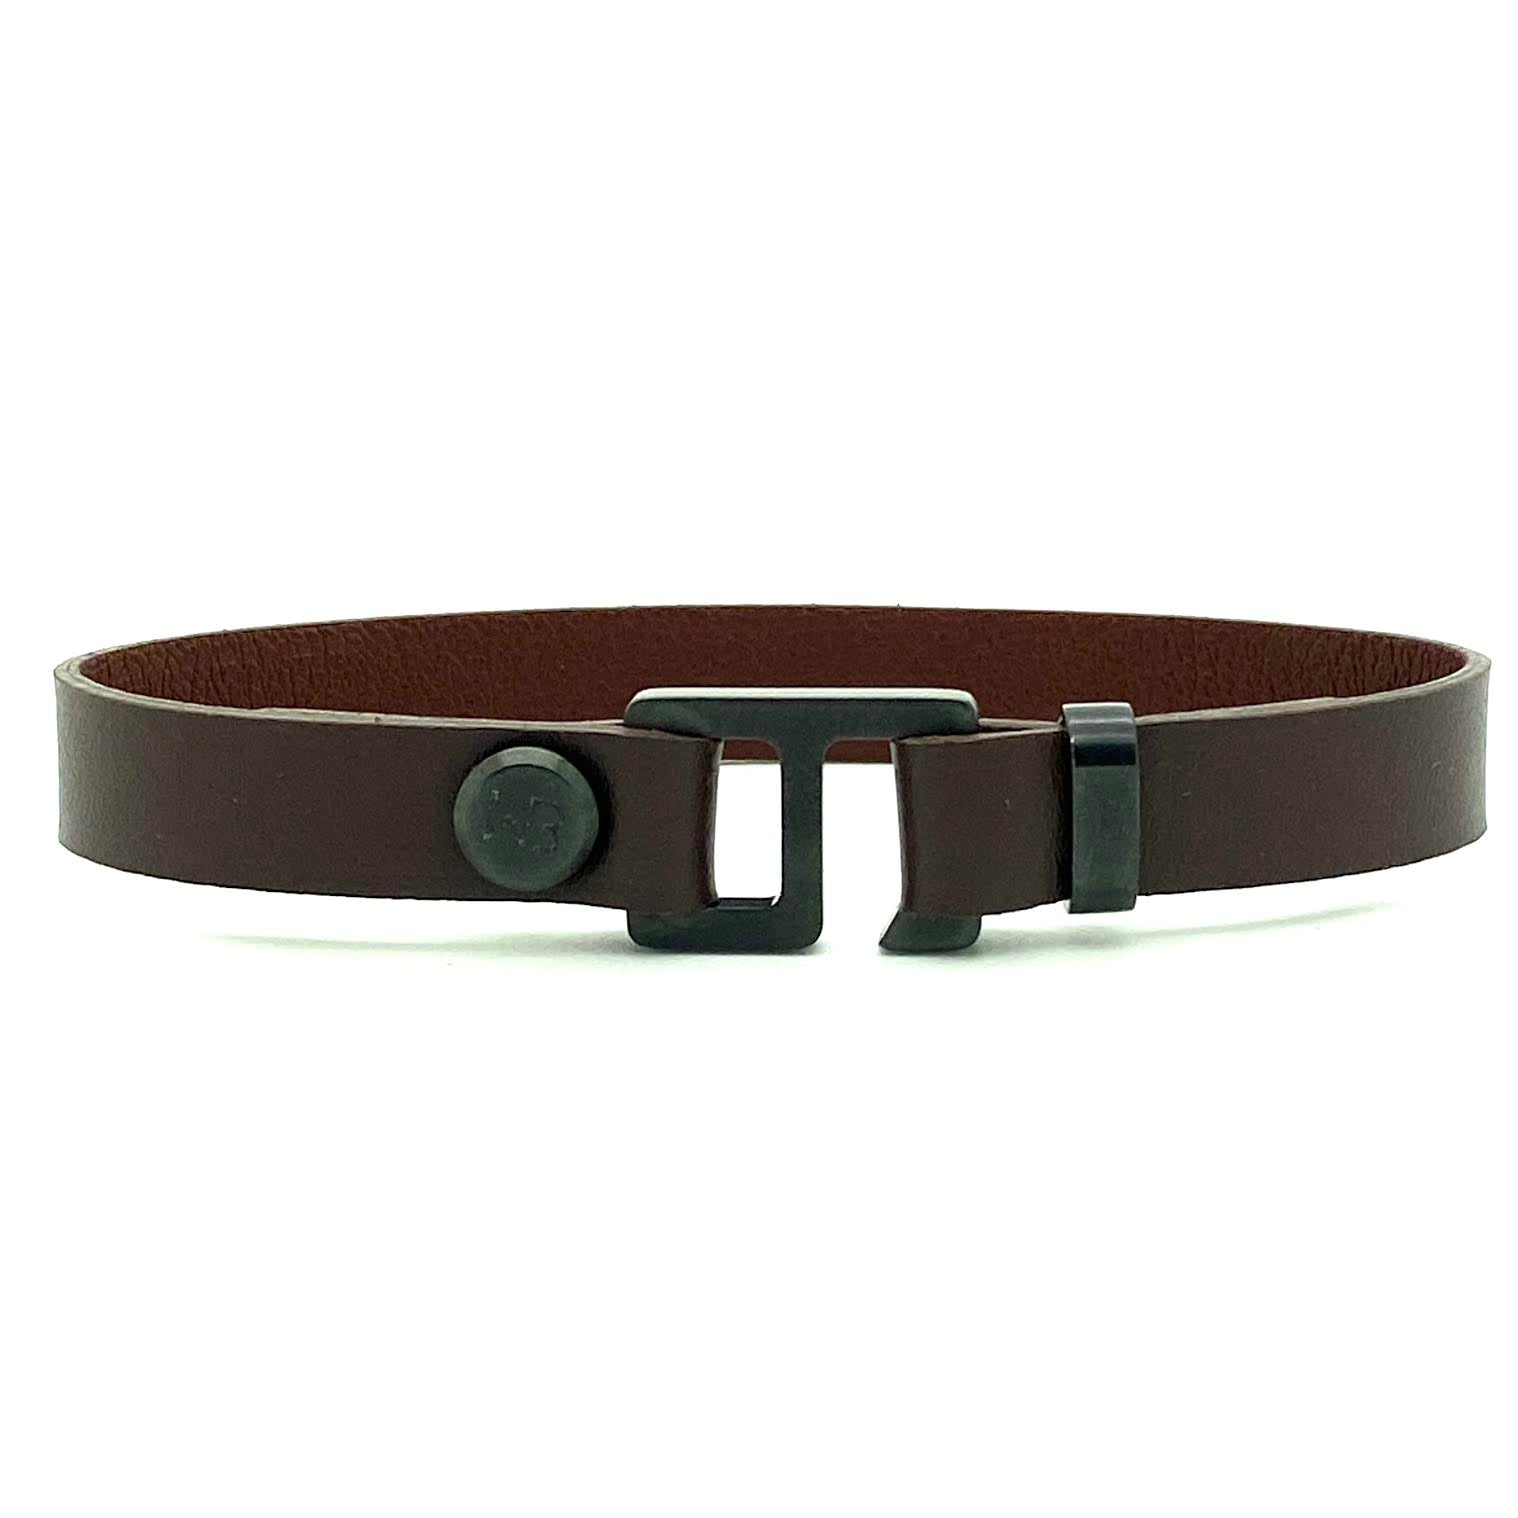 With a trendy, cool modern vibe, this dark brown french/Italian leather cuff bracelet is paired with your choice of brushed yellow gold, rose gold, stainless steel, or black ceramic hardware. Our signature cuff bracelet is a modern staple for your WristBend collection. Made by WristBend